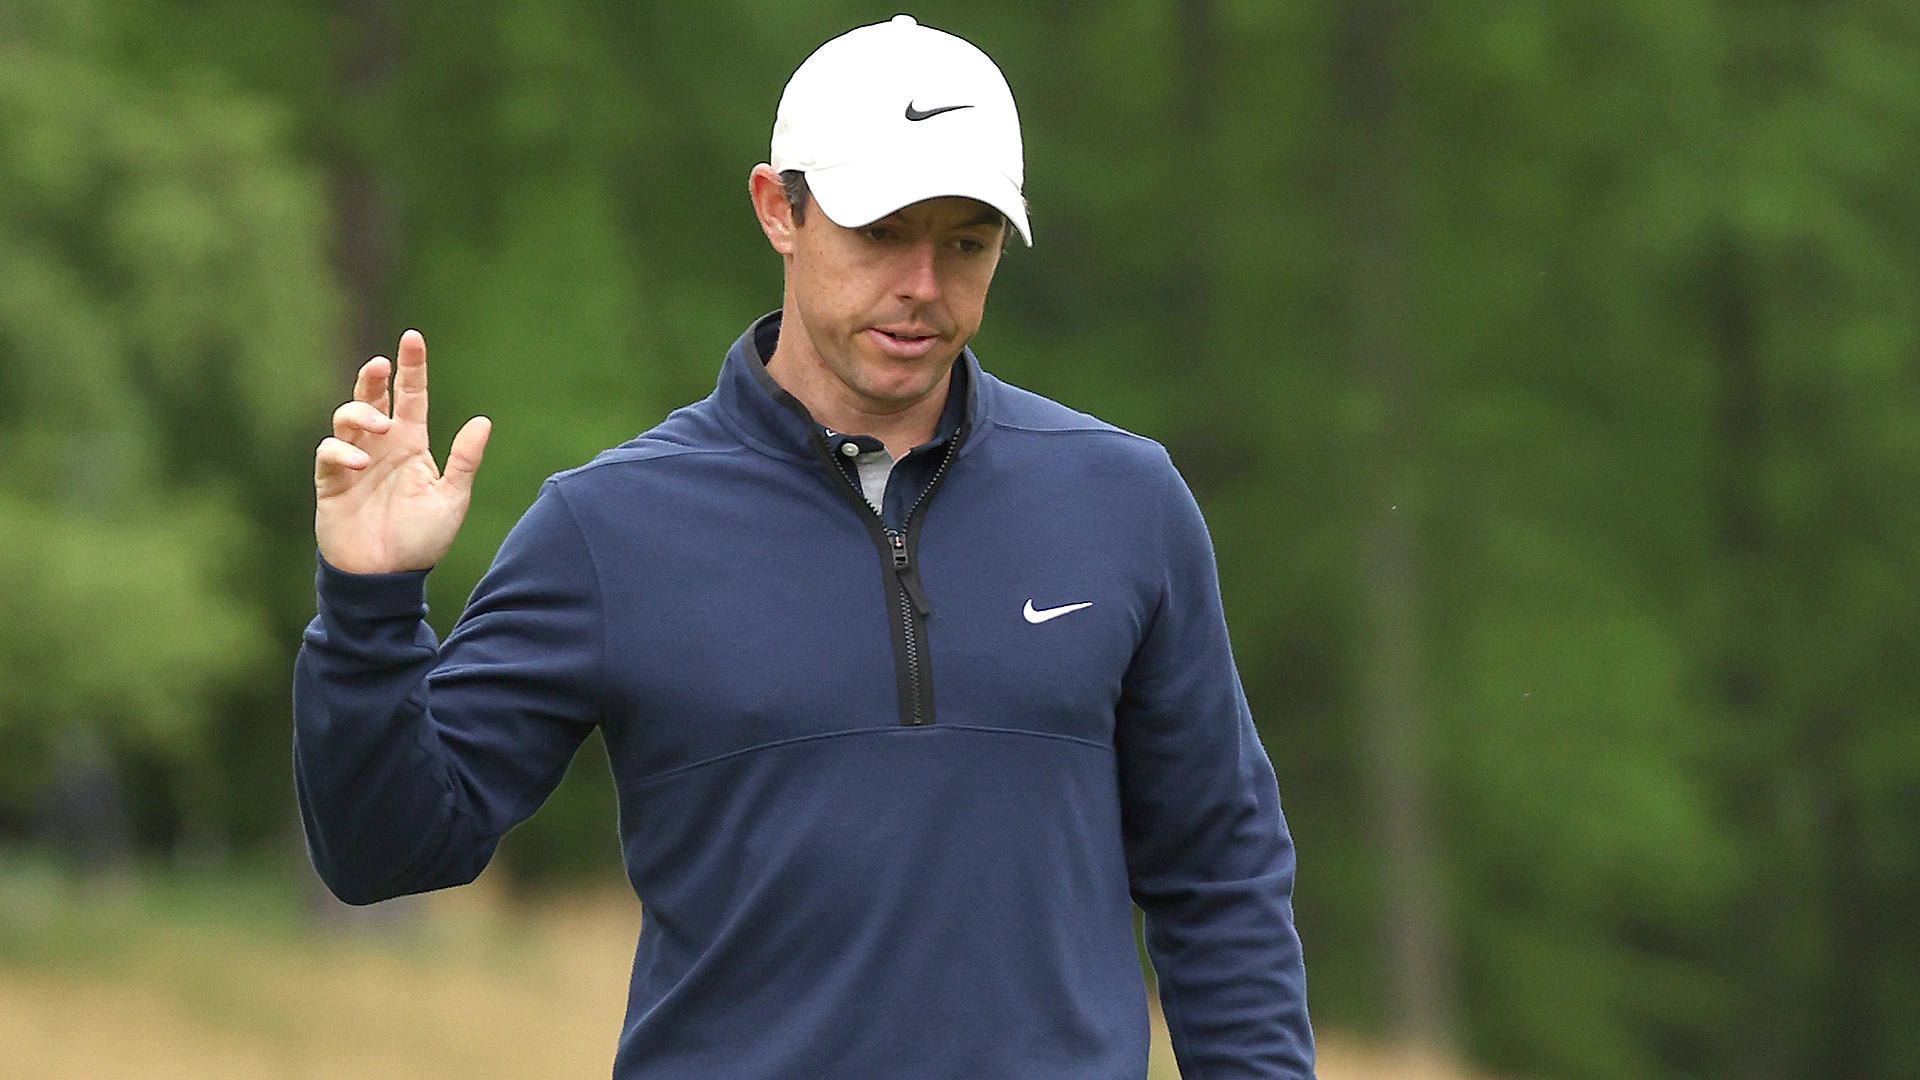 Rory McIlroy ‘pretty happy’ with bounce back, opening 67